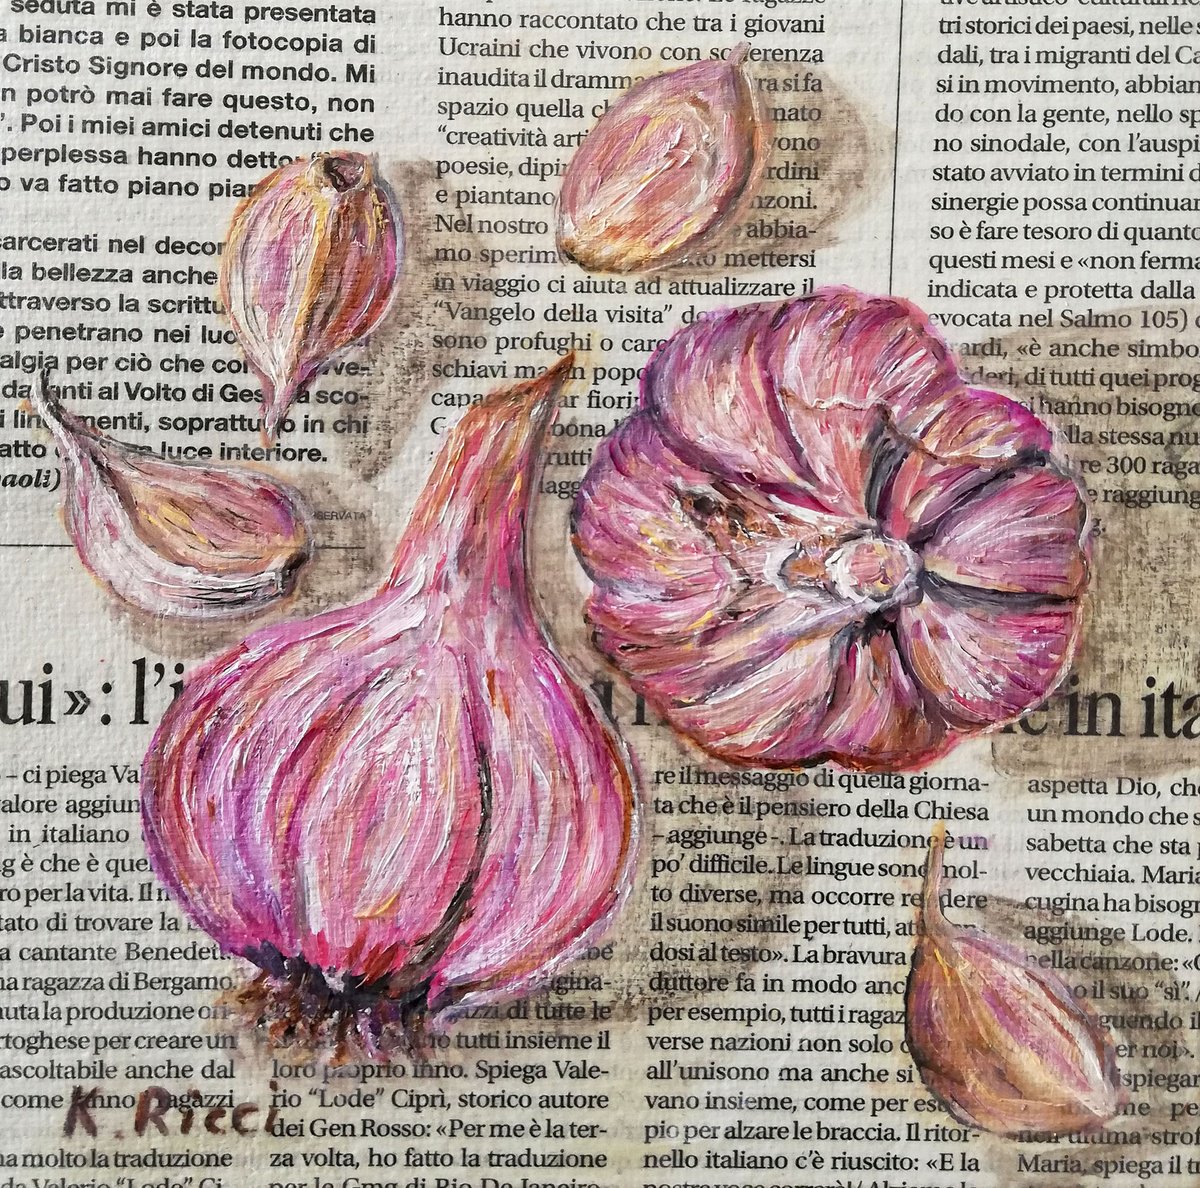 Garlic Cloves on Newspaper Original Oil on Canvas Board Painting 6 by 6 inches (15x15 cm... by Katia Ricci